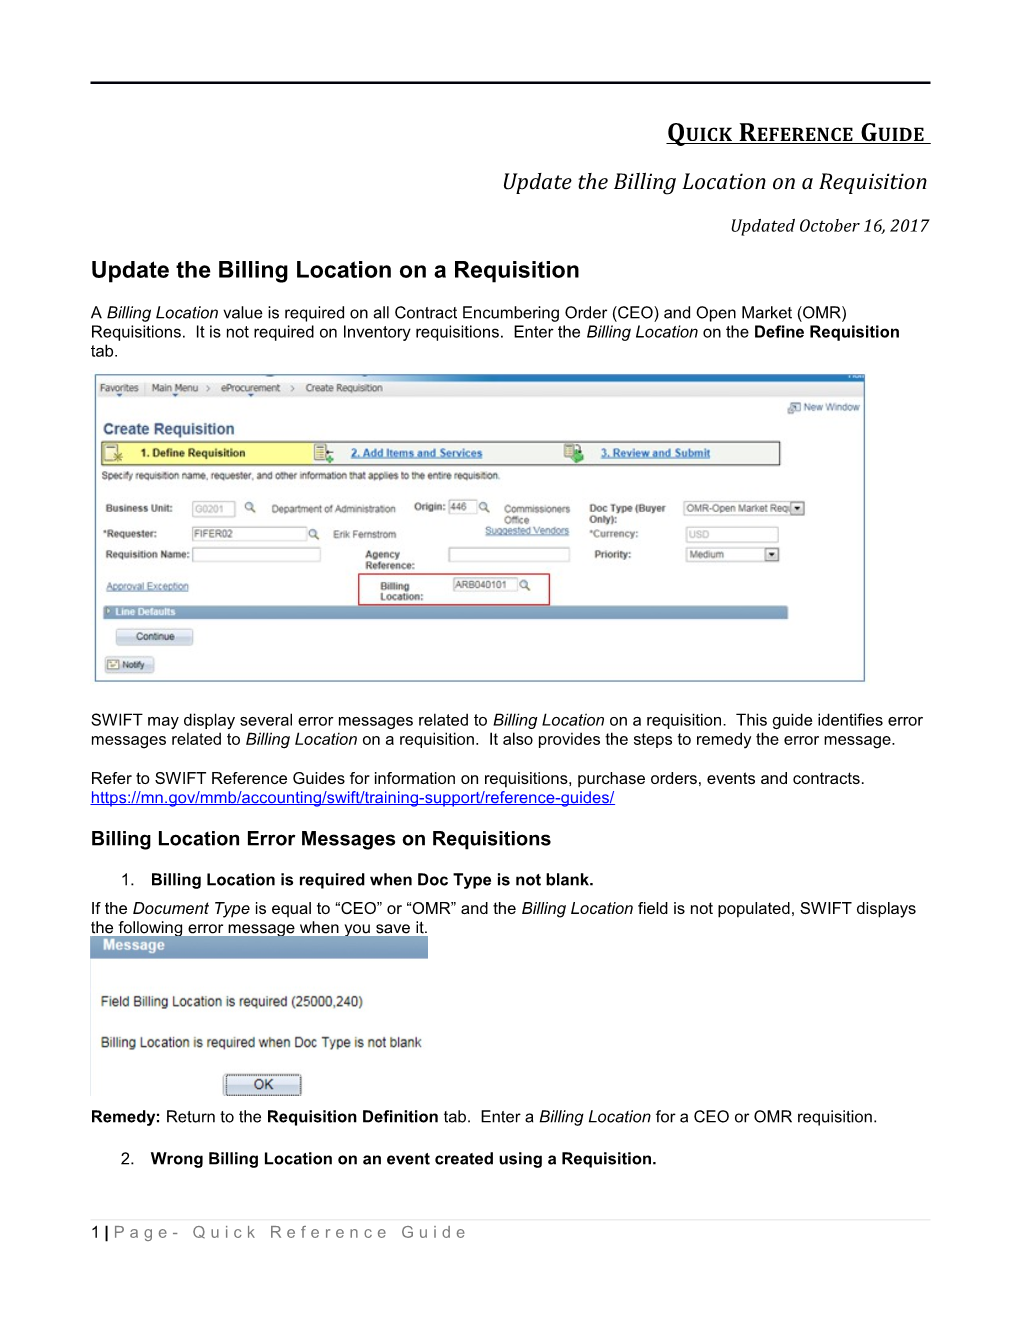 Update Billing Location on a Requisition